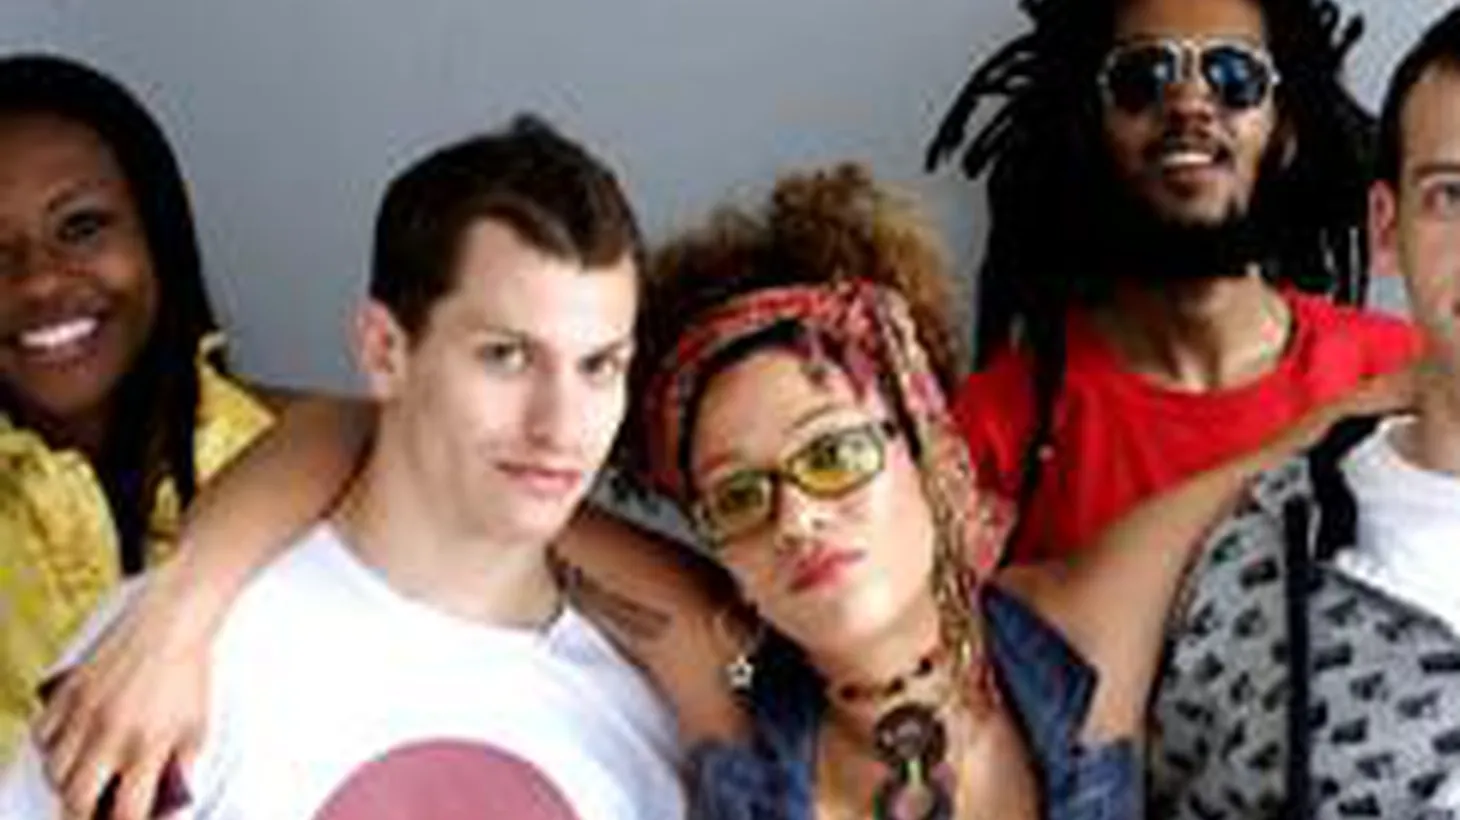 Neo-soul artists Little Jackie perform their infectious songs on Morning Becomes Eclectic at 11:15am.